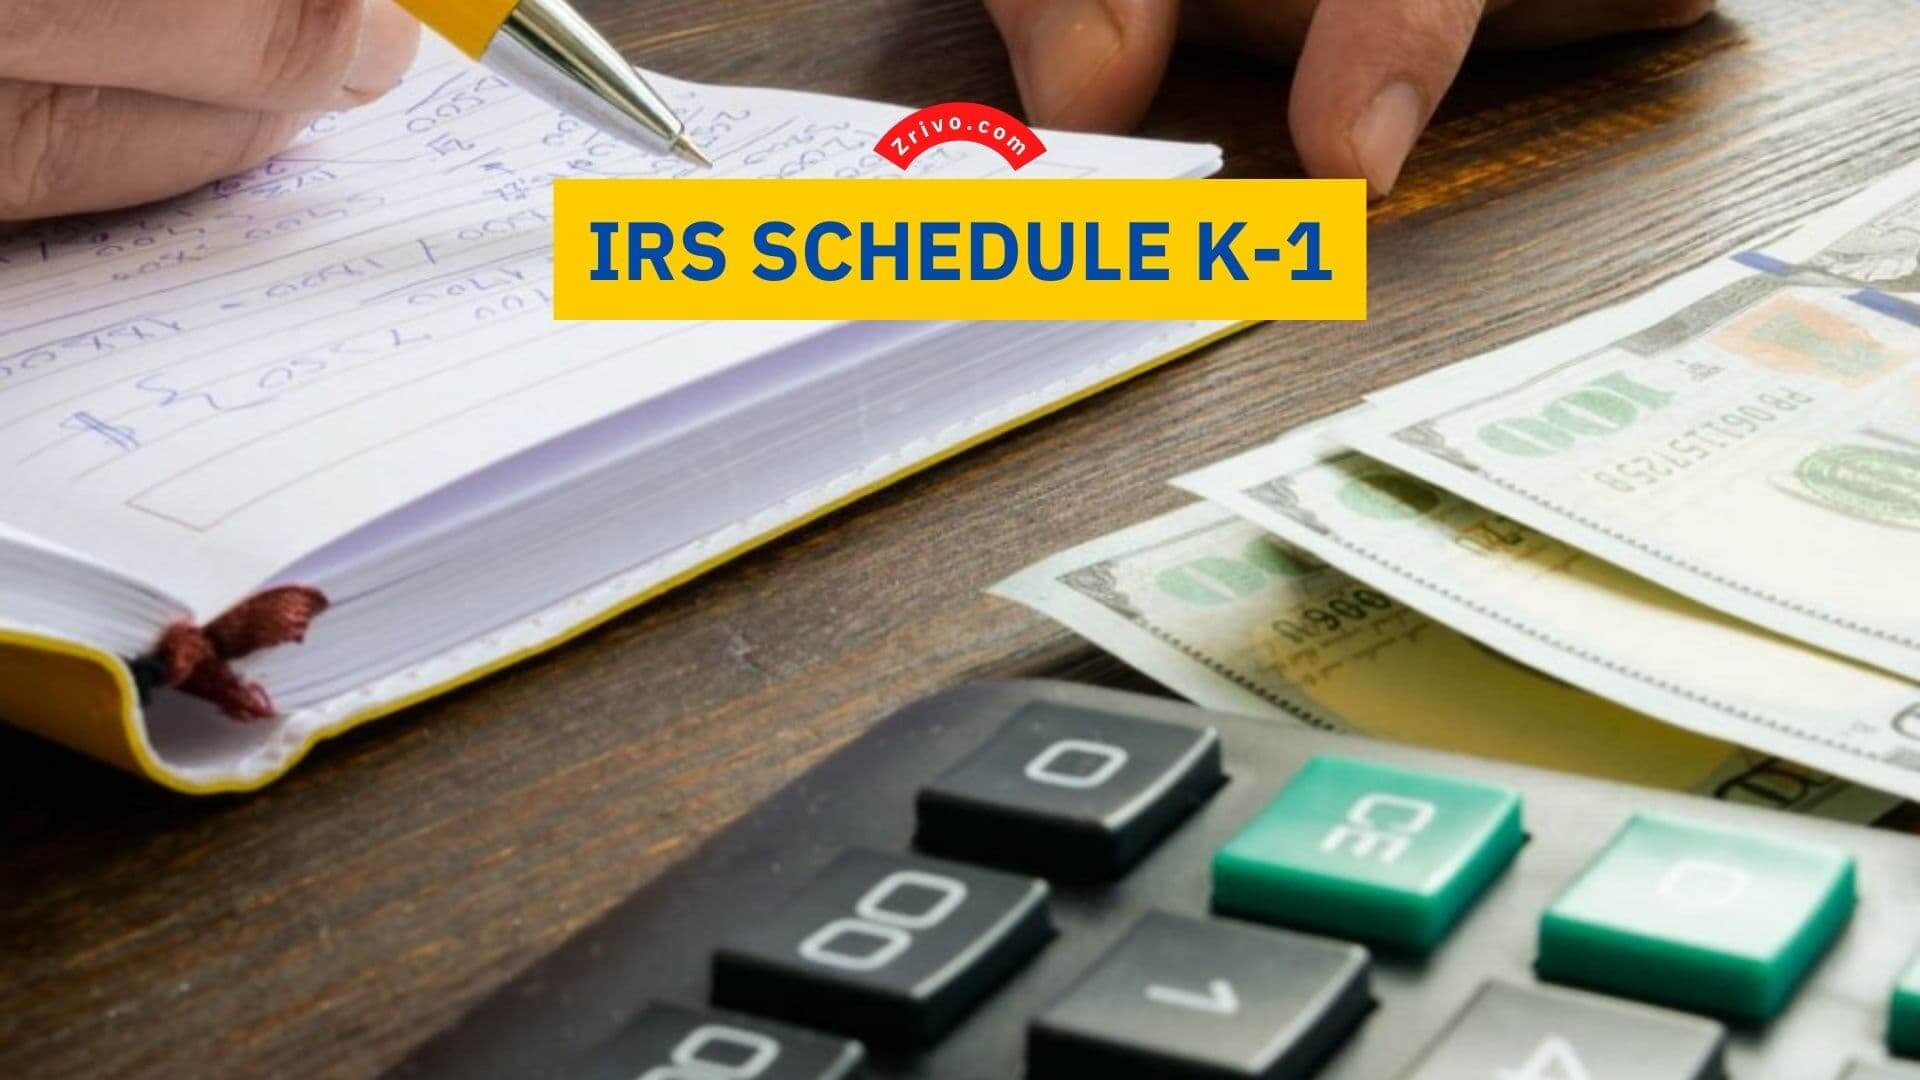 IRS-Schedule-K-1-Zrivo-Cover-1